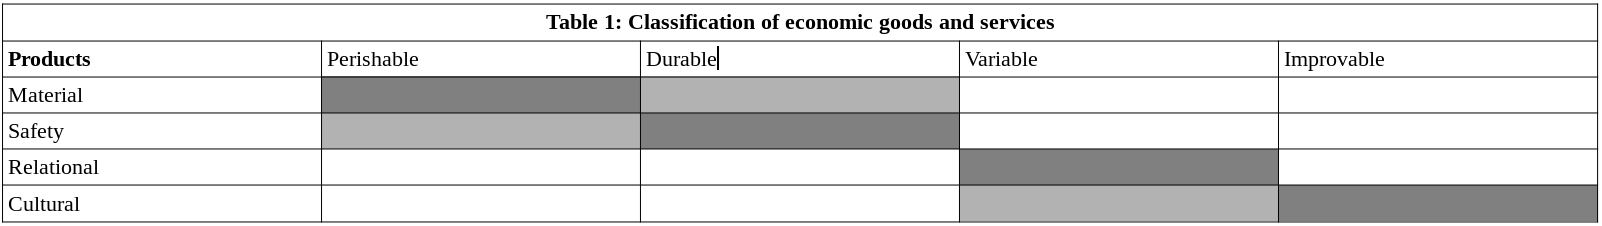 Table 1: Classification of economic goods and services.